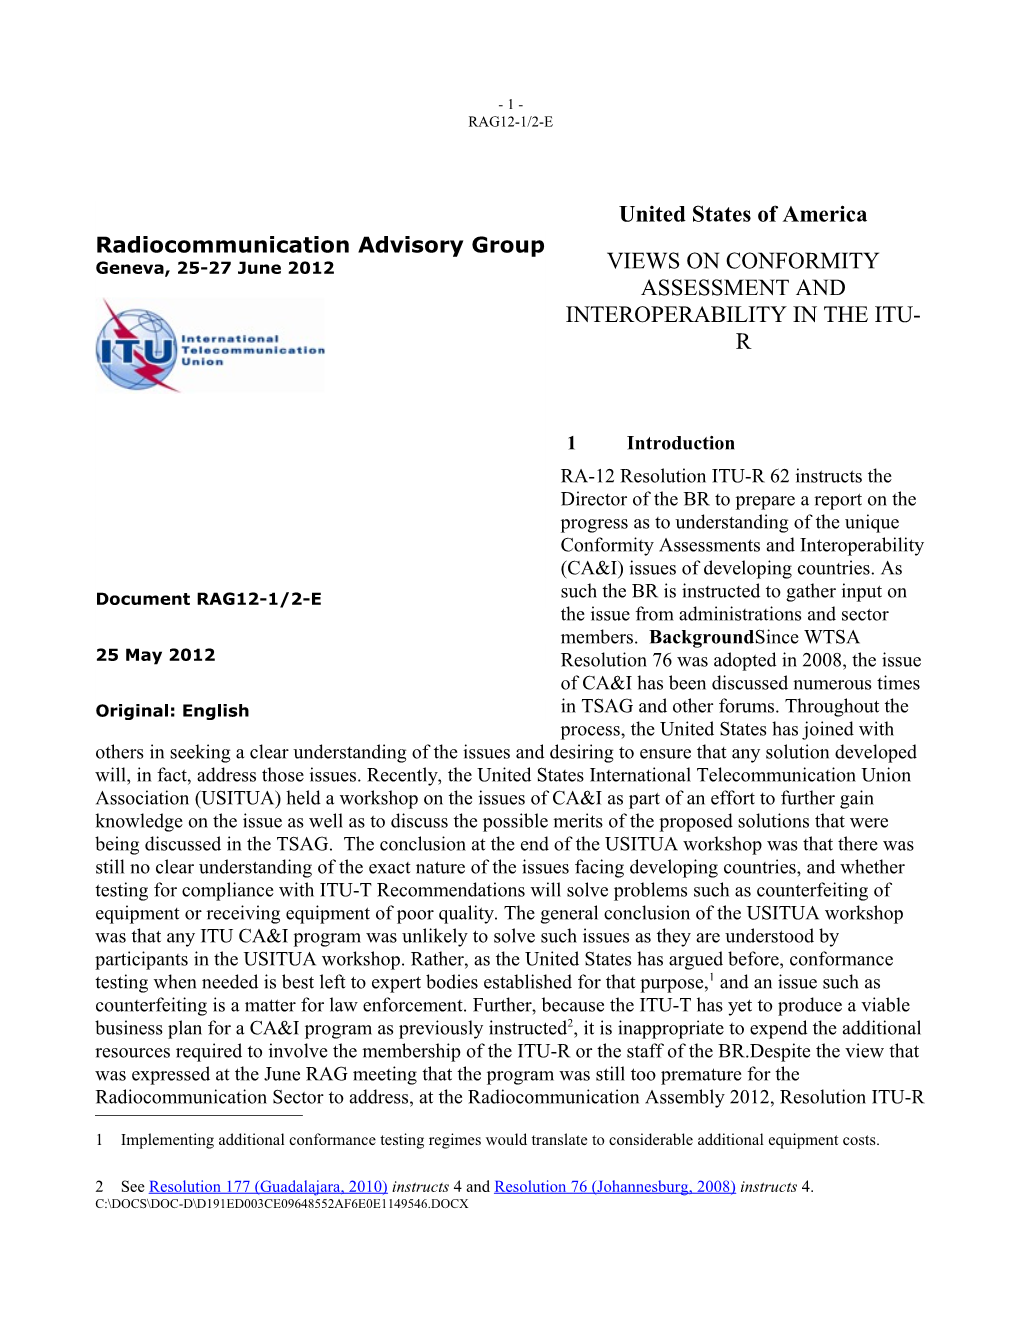 Report to the Fifteenth Meeting of the Radiocommunication Advisory Group